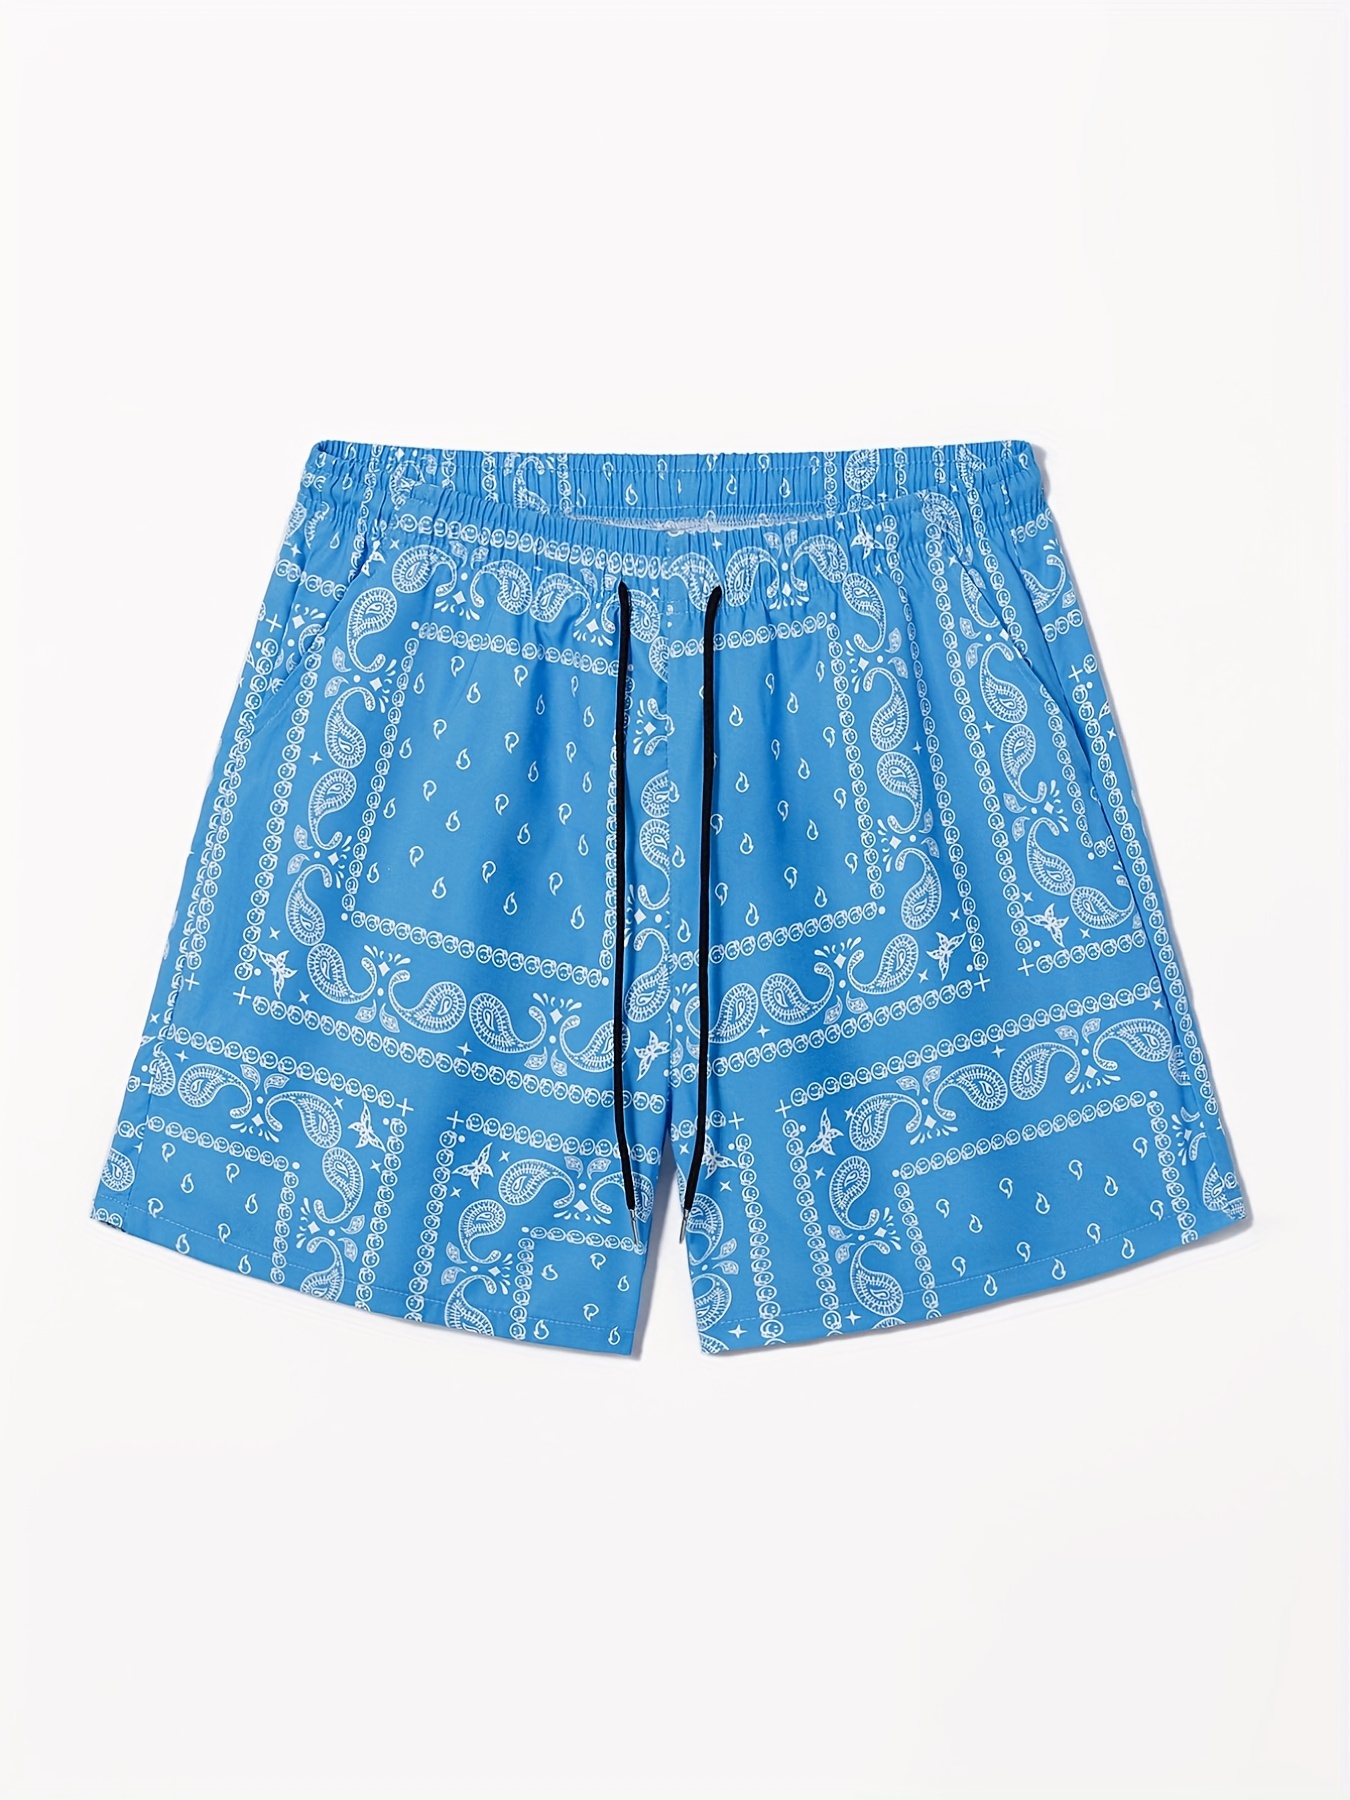 Paisley And Other Trendy Pattern Comfy Beach Shorts, Men's Casual Waist  Drawstring Shorts For Summer Beach Resort